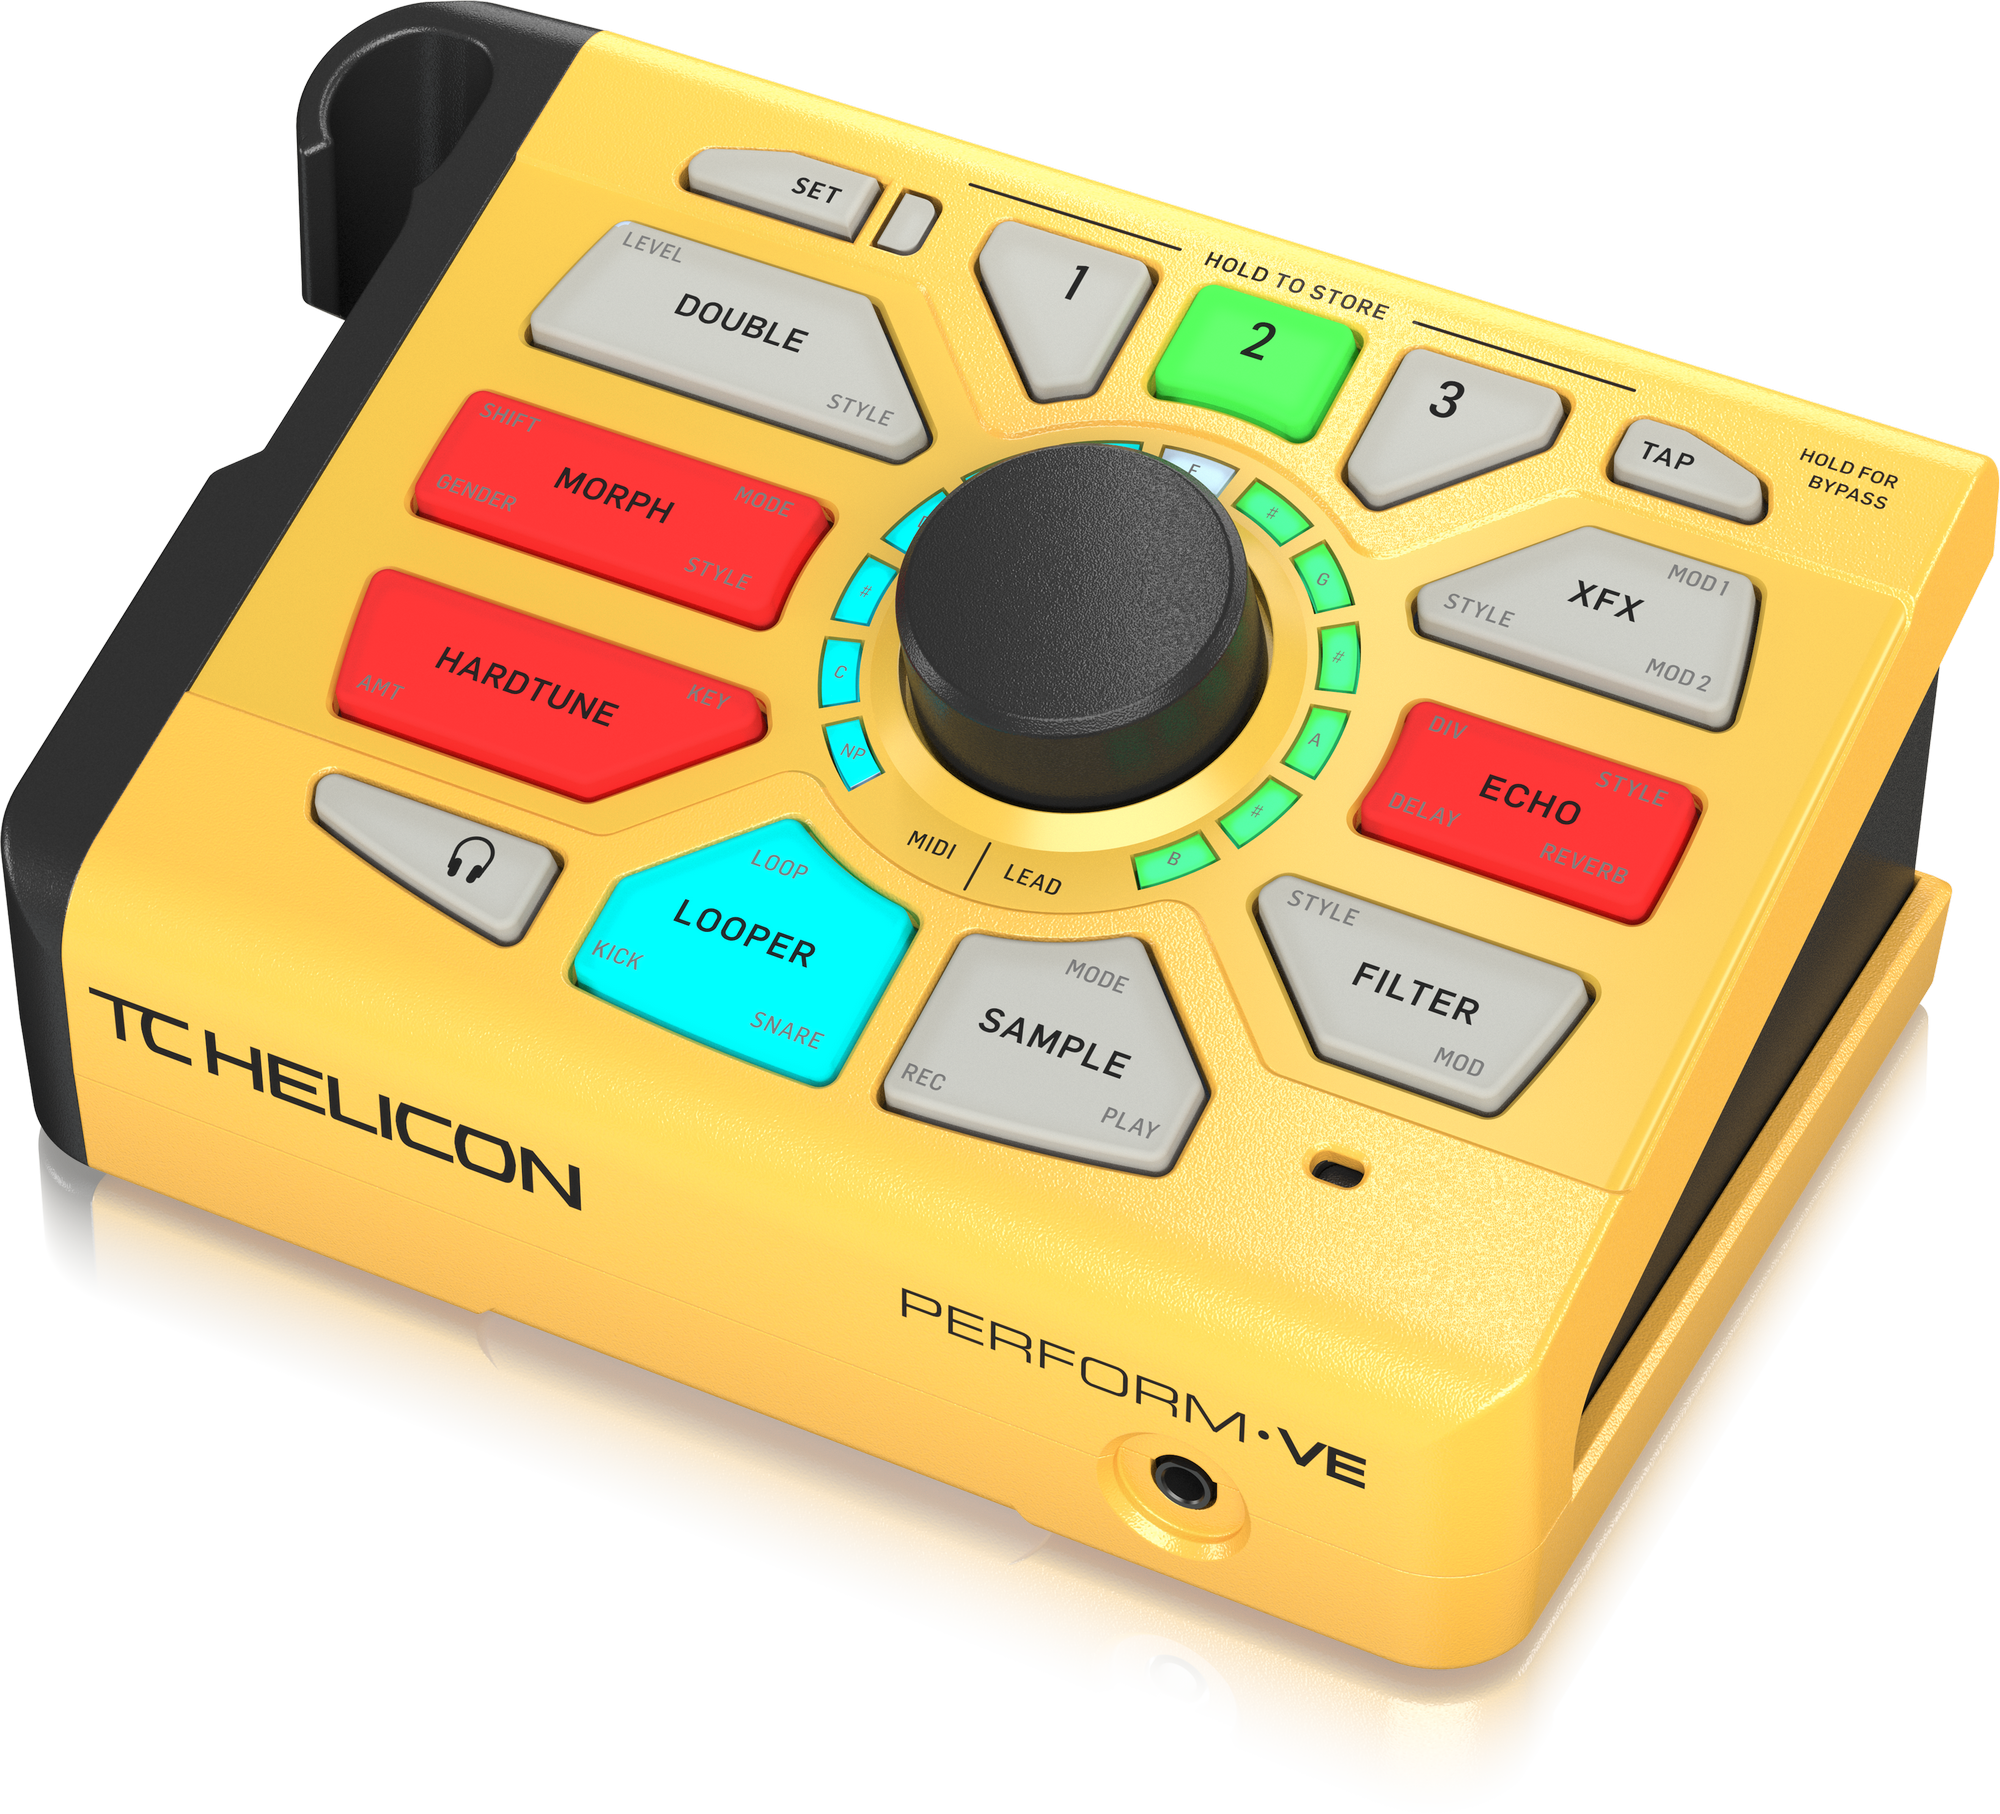 Tc Helicon Product Perform Ve